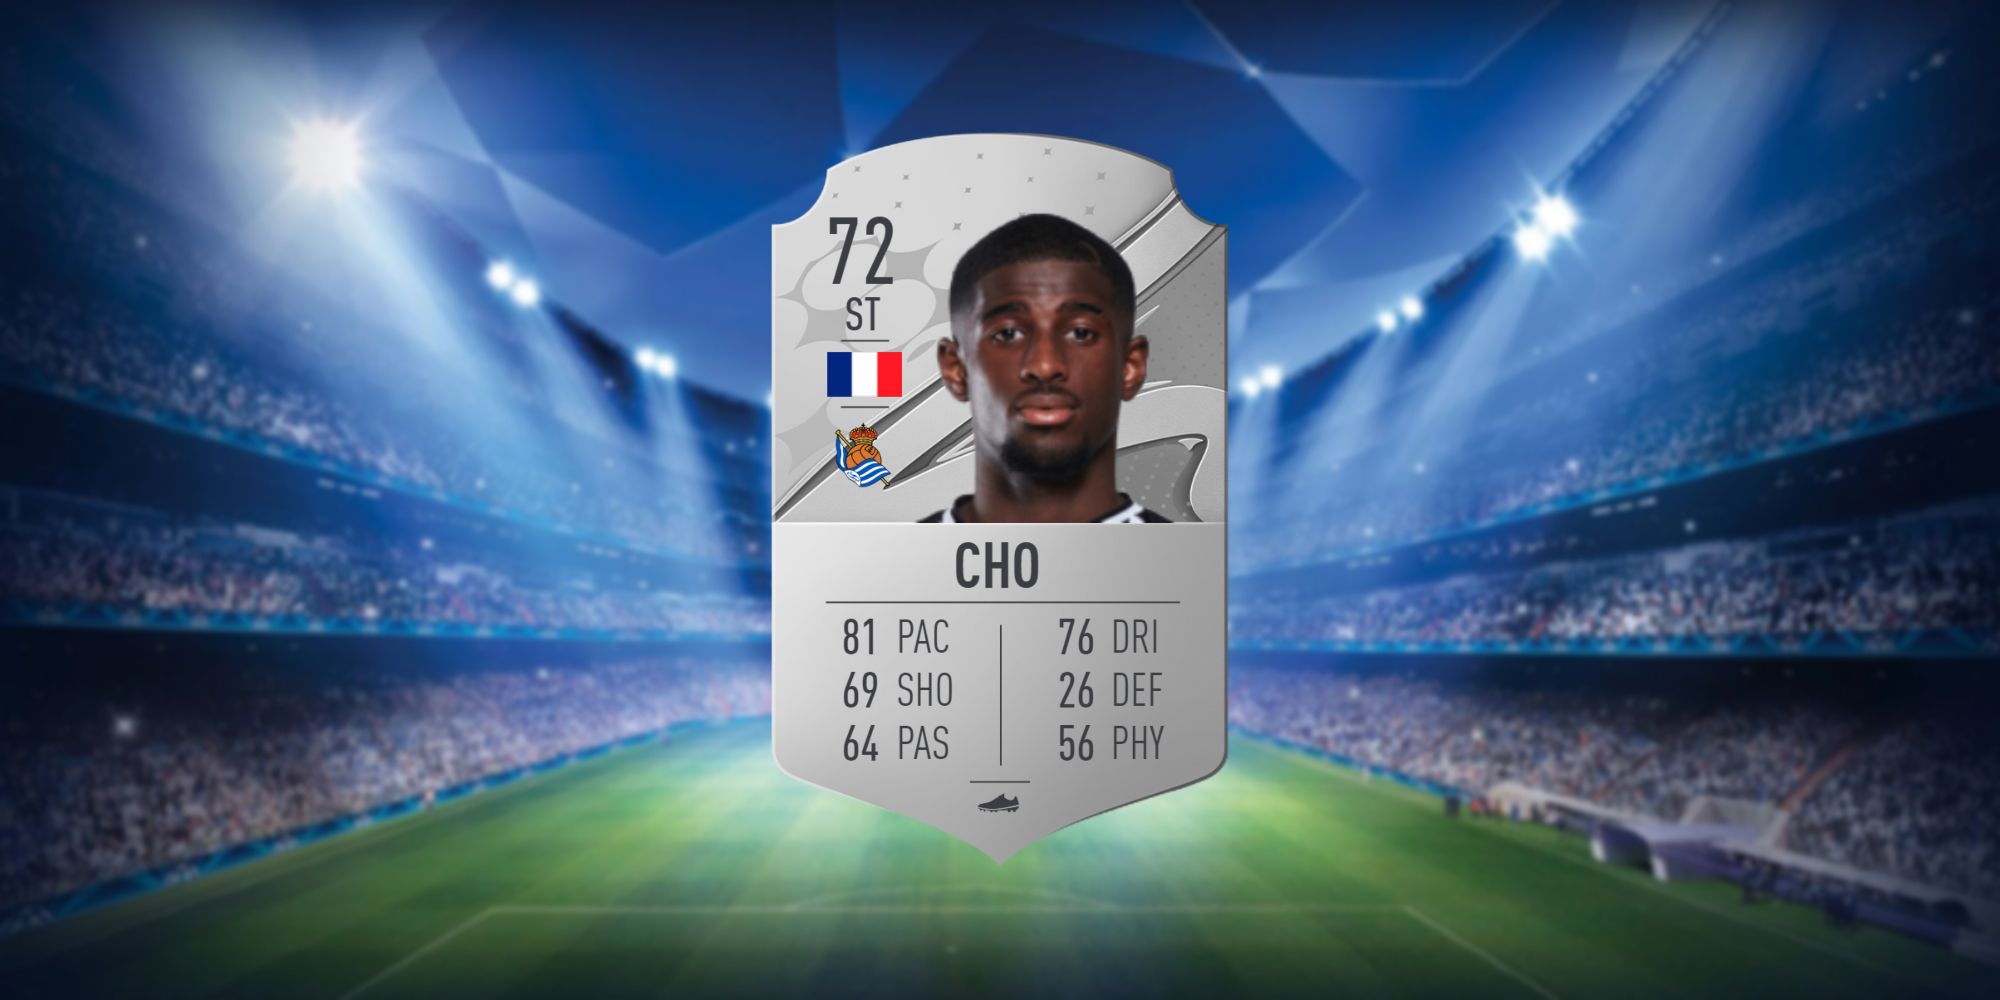 An image of Mohammed-Ali Cho's FIFA 23 Card